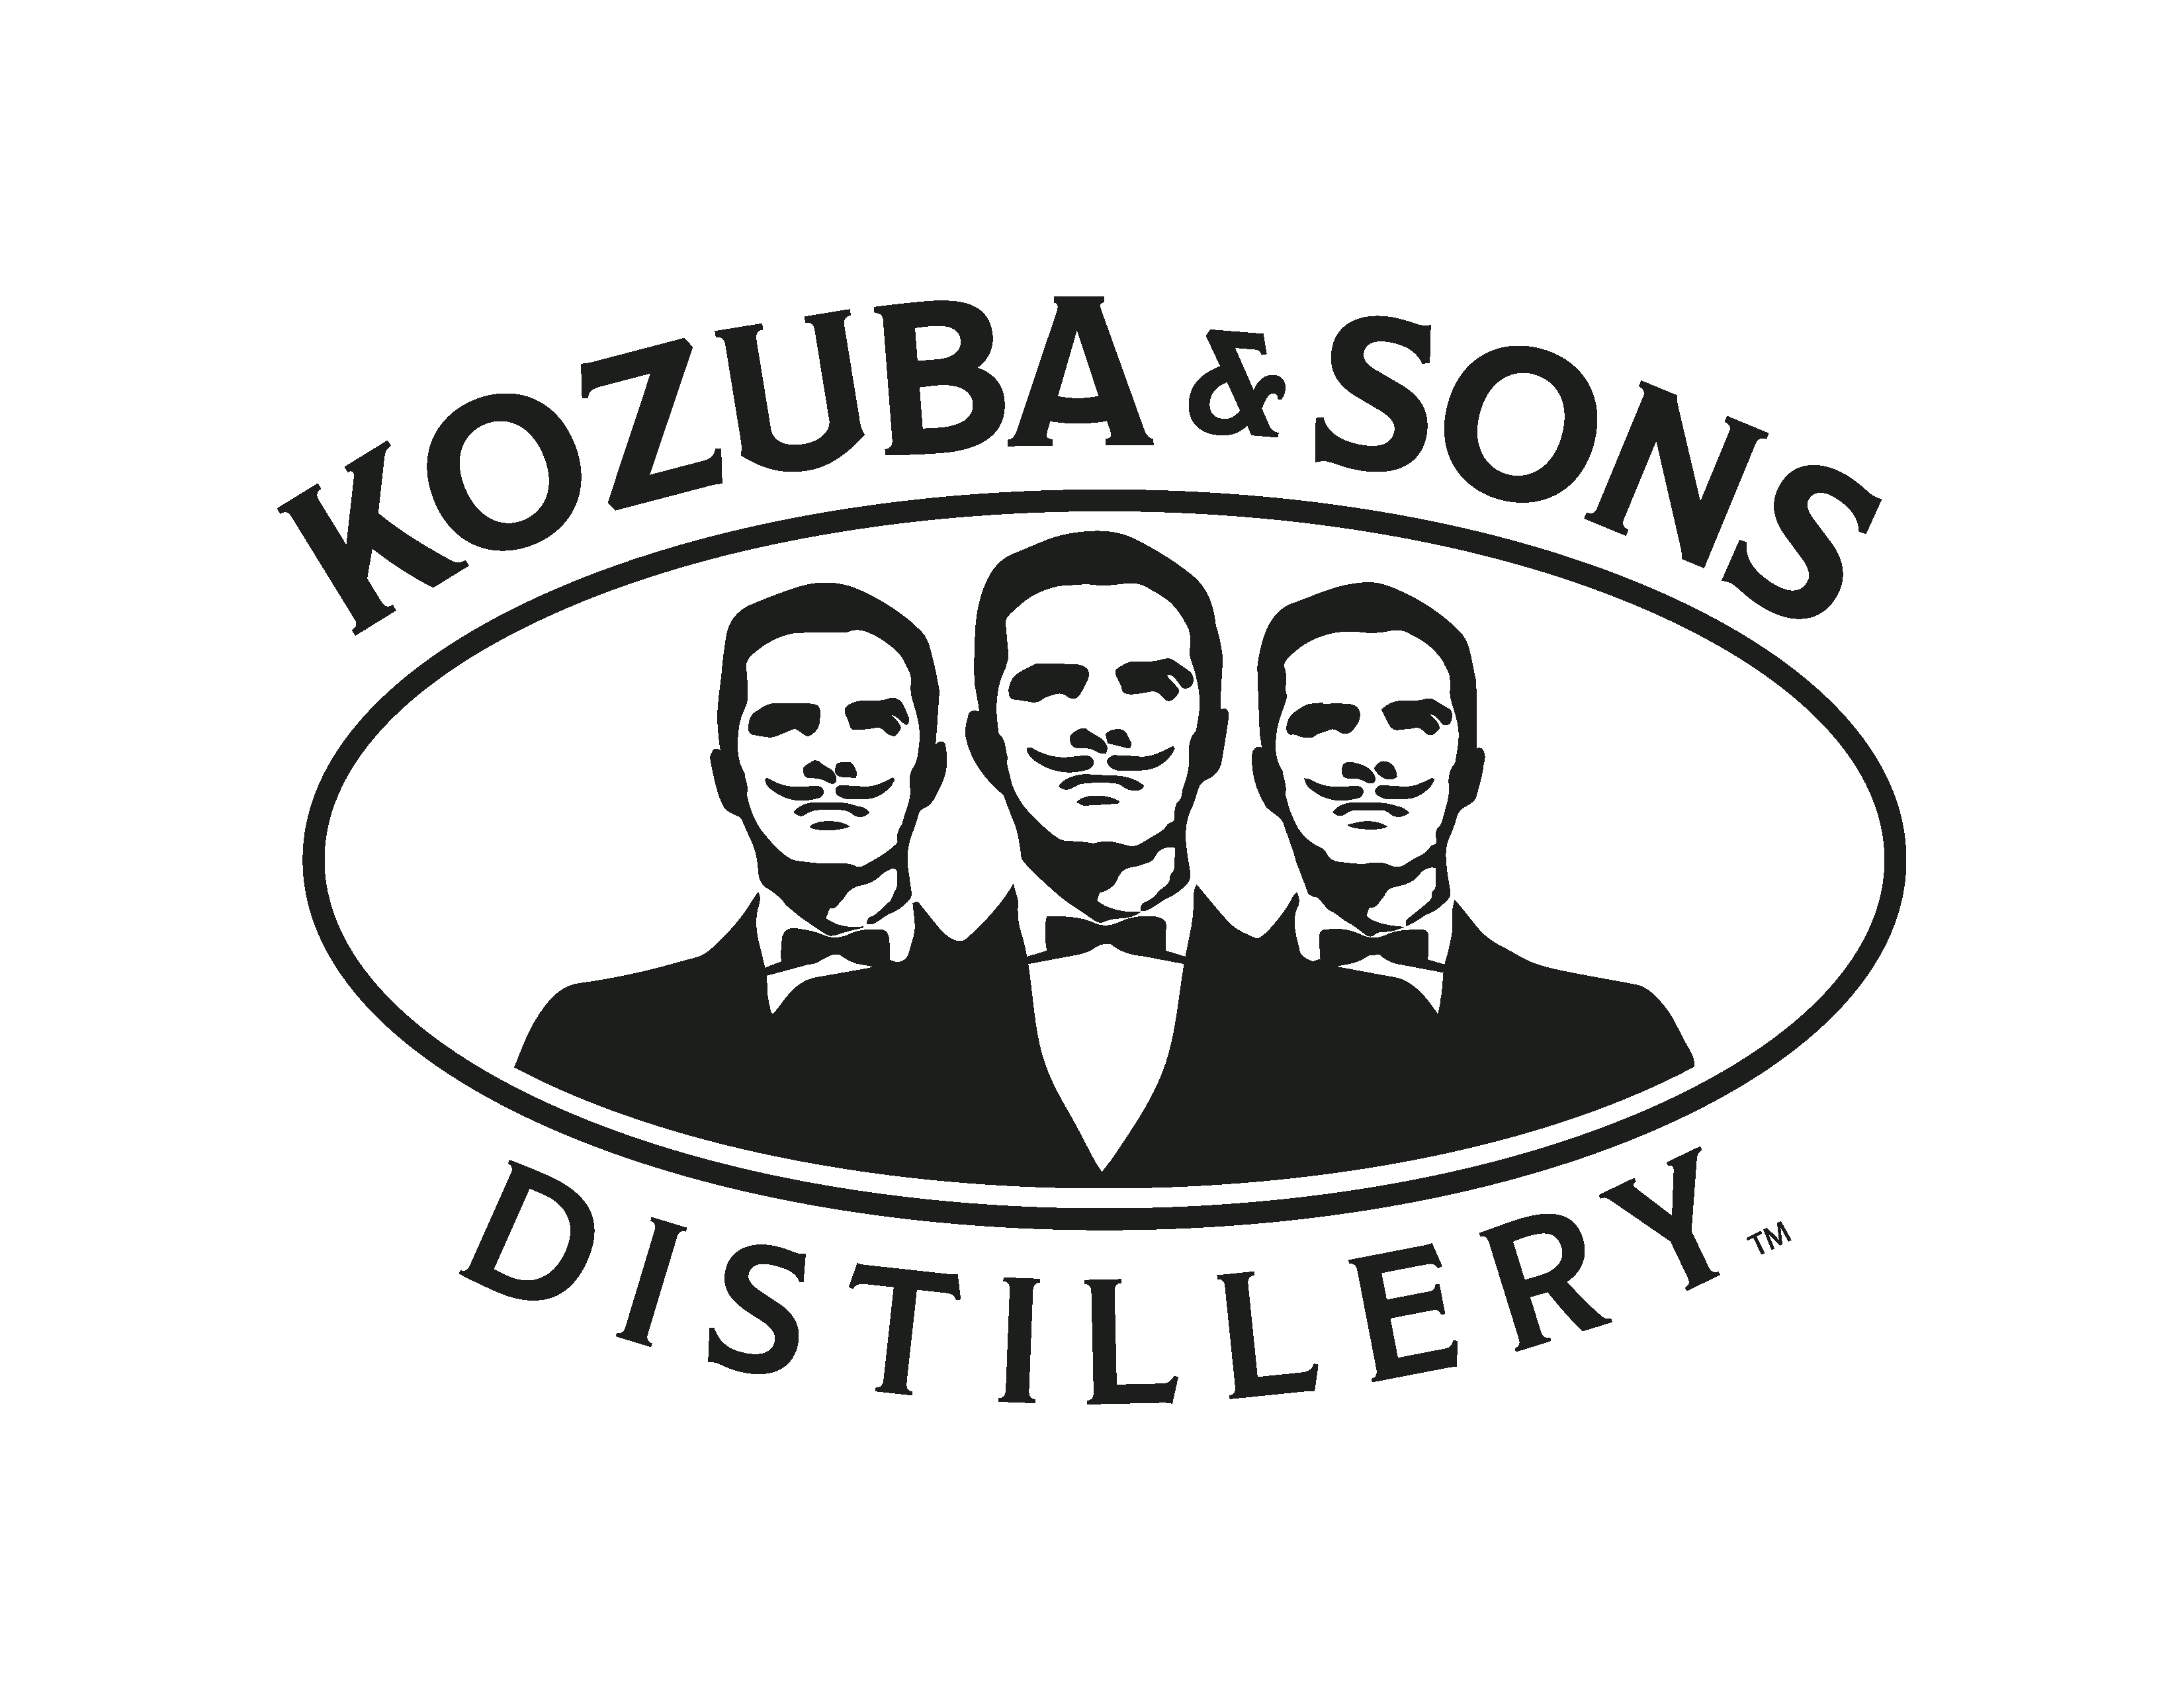 Founded in 2005 in Poland, Kozuba & Sons is a family-run distillery that produces premium spirits.